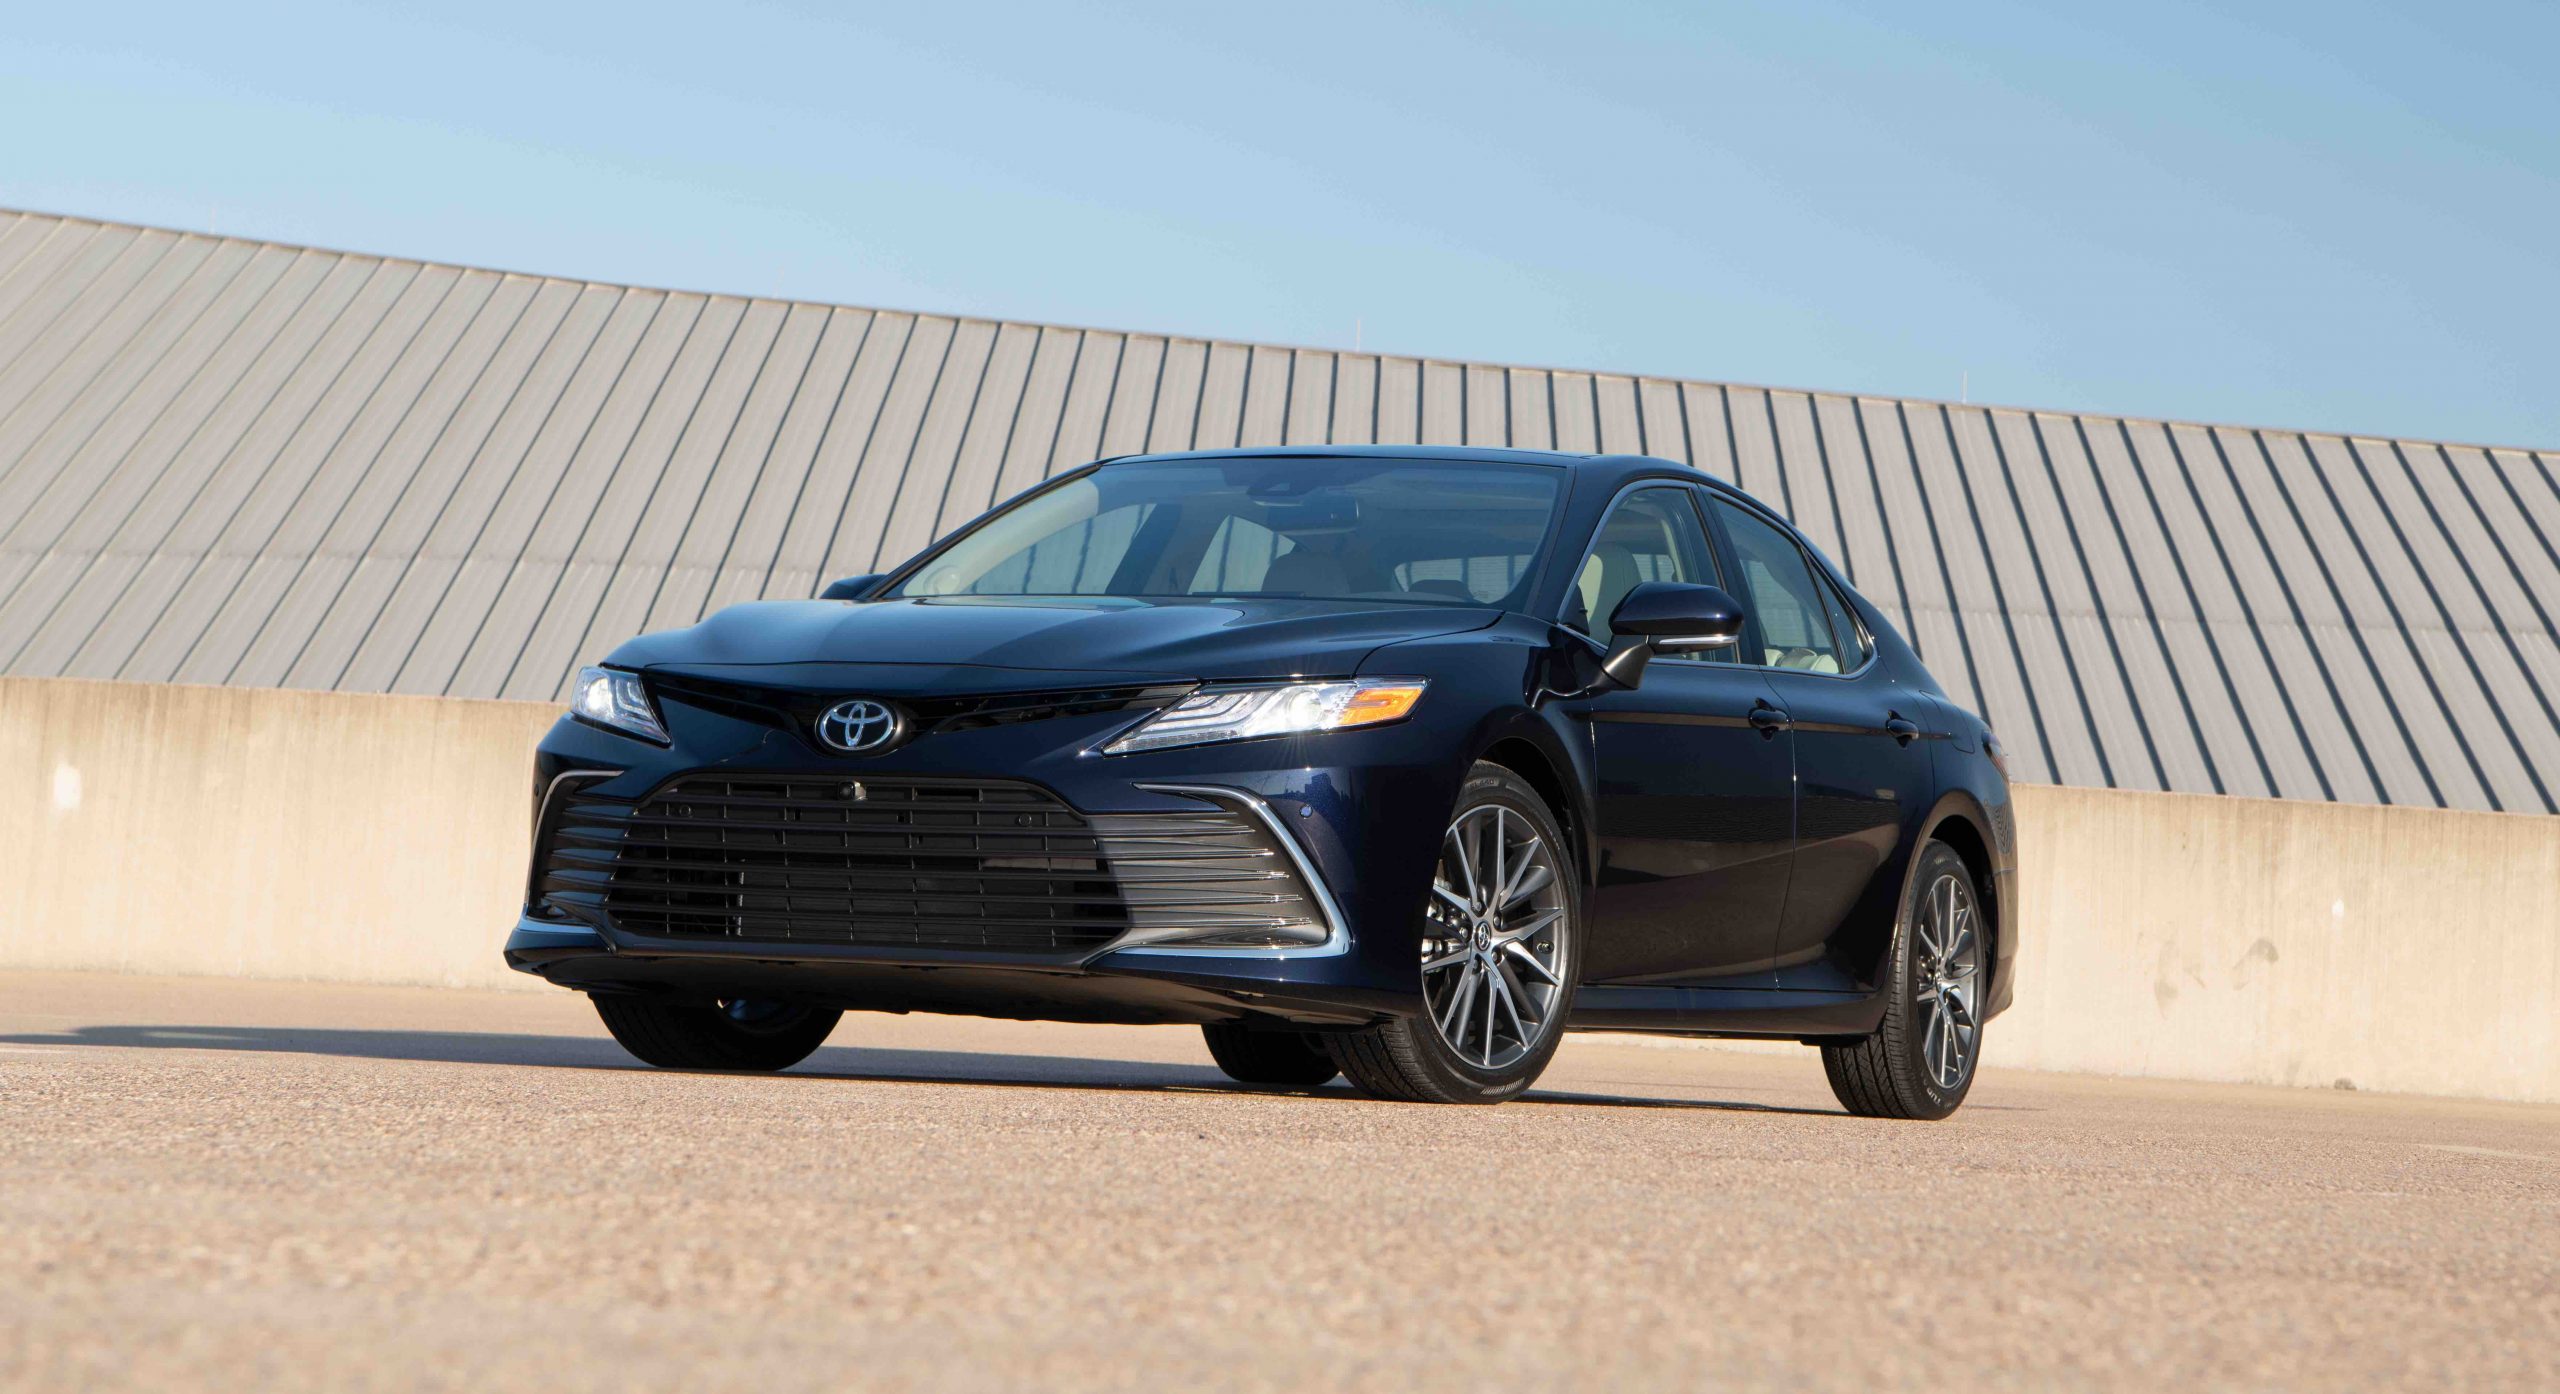 A front view of the 2022 Toyota Camry in blue